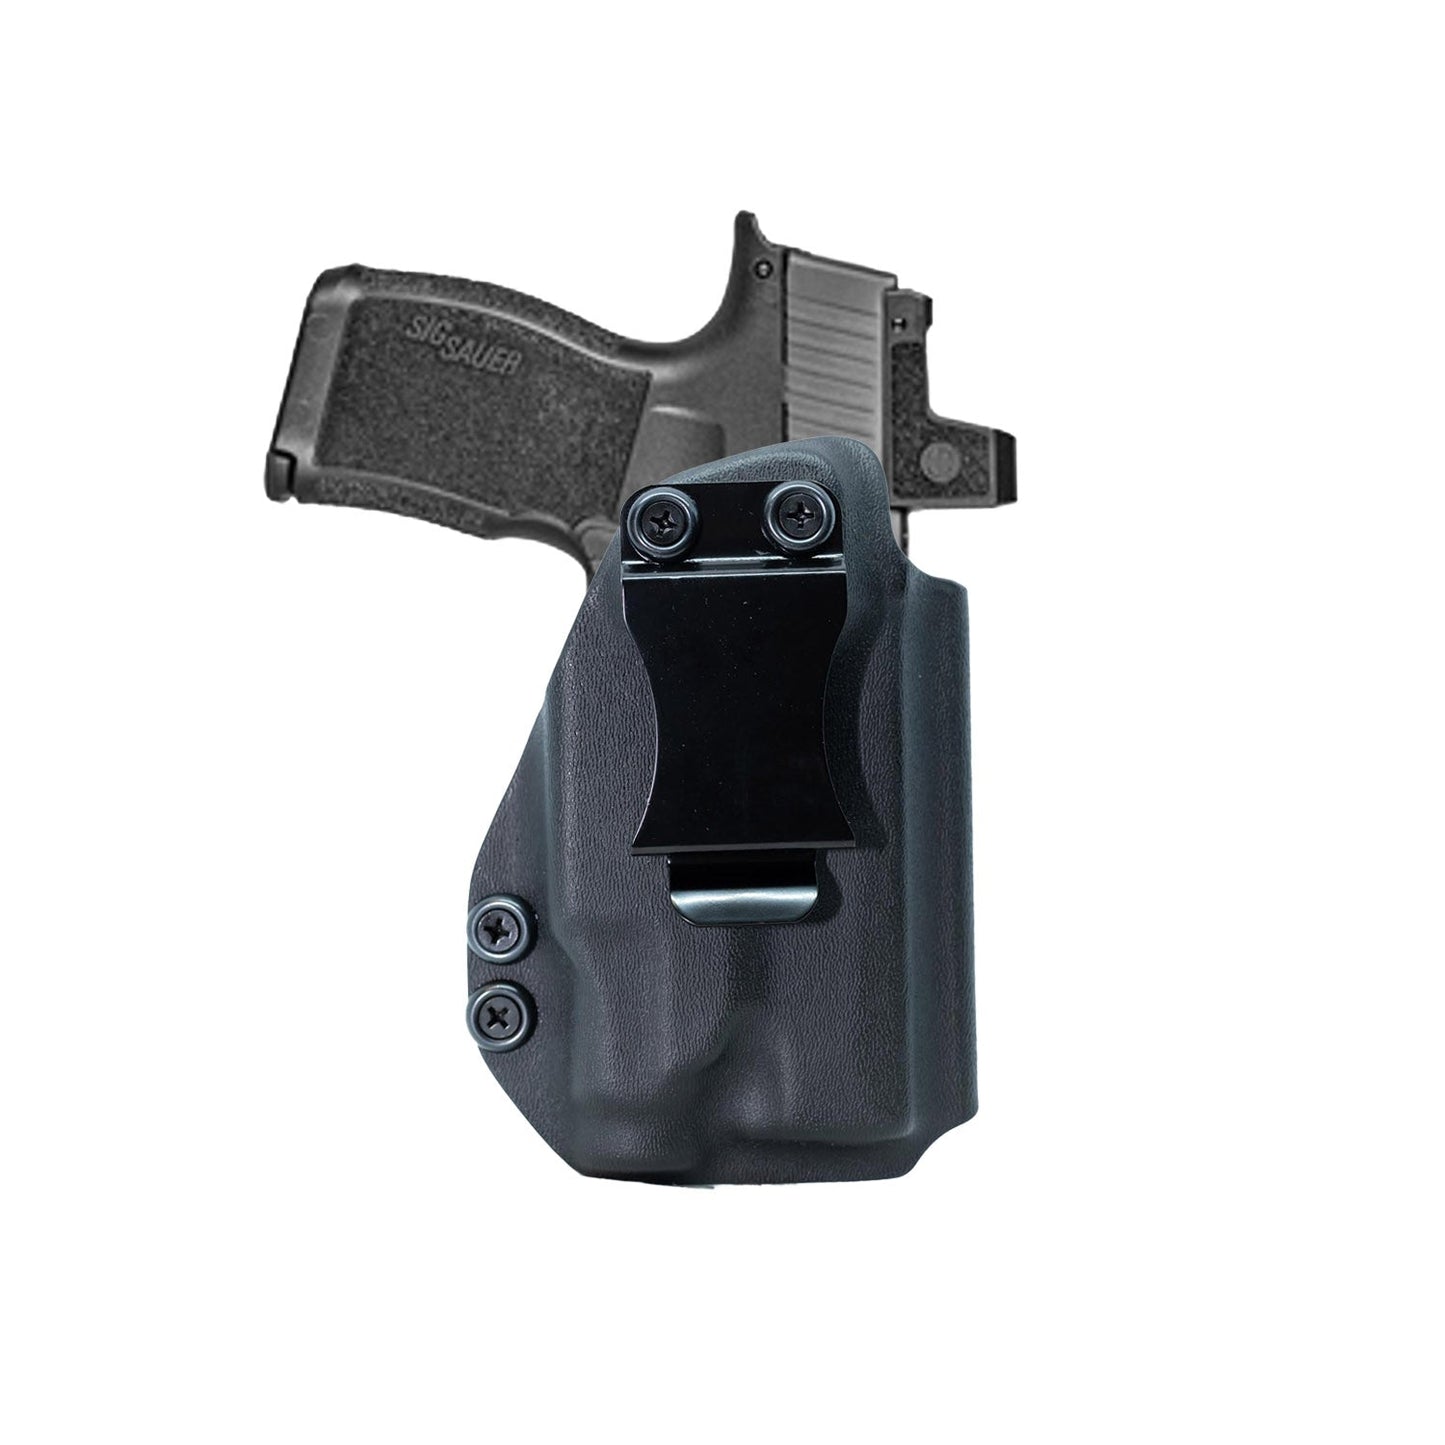 Glock 21 With TLR1 Light IWB (Inside The Waistband Holster)